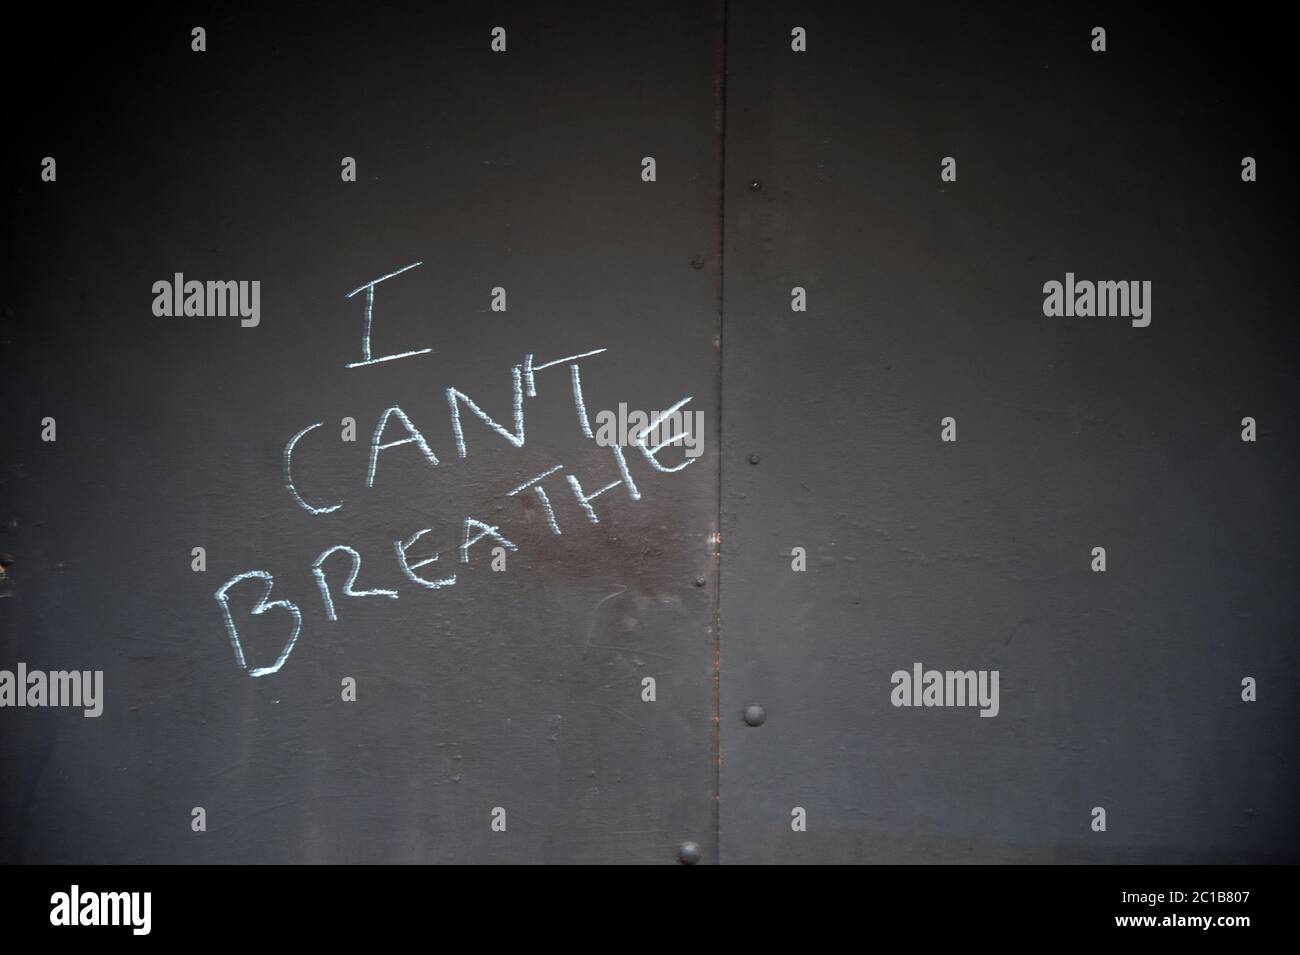 Hackney,London June 2020 during the Covid-19 (Coronavirus) pandemic. 'I cant breathe' chalked on a wall, the last words of George Foley as he was suff Stock Photo